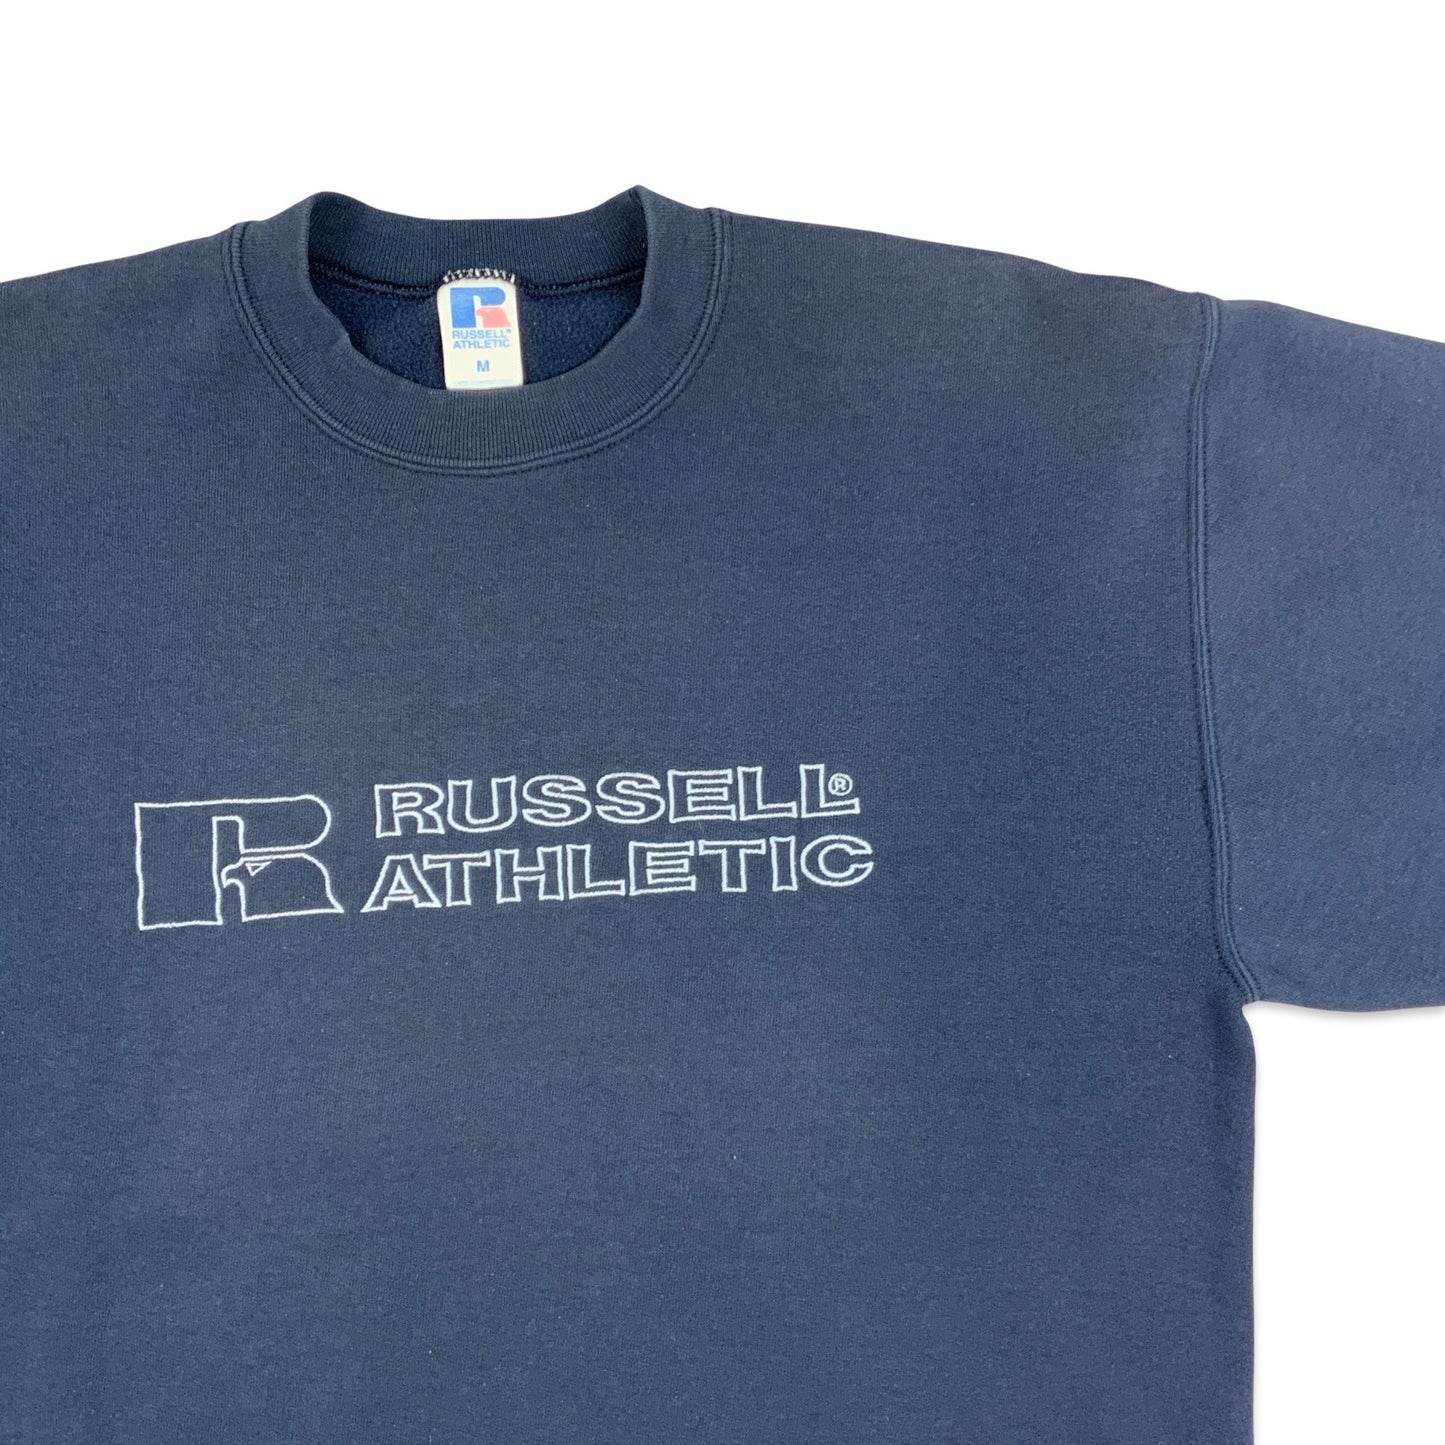 90s 00s Vintage Navy Blue Russell Athletic Spellout Sweatshirt S M L